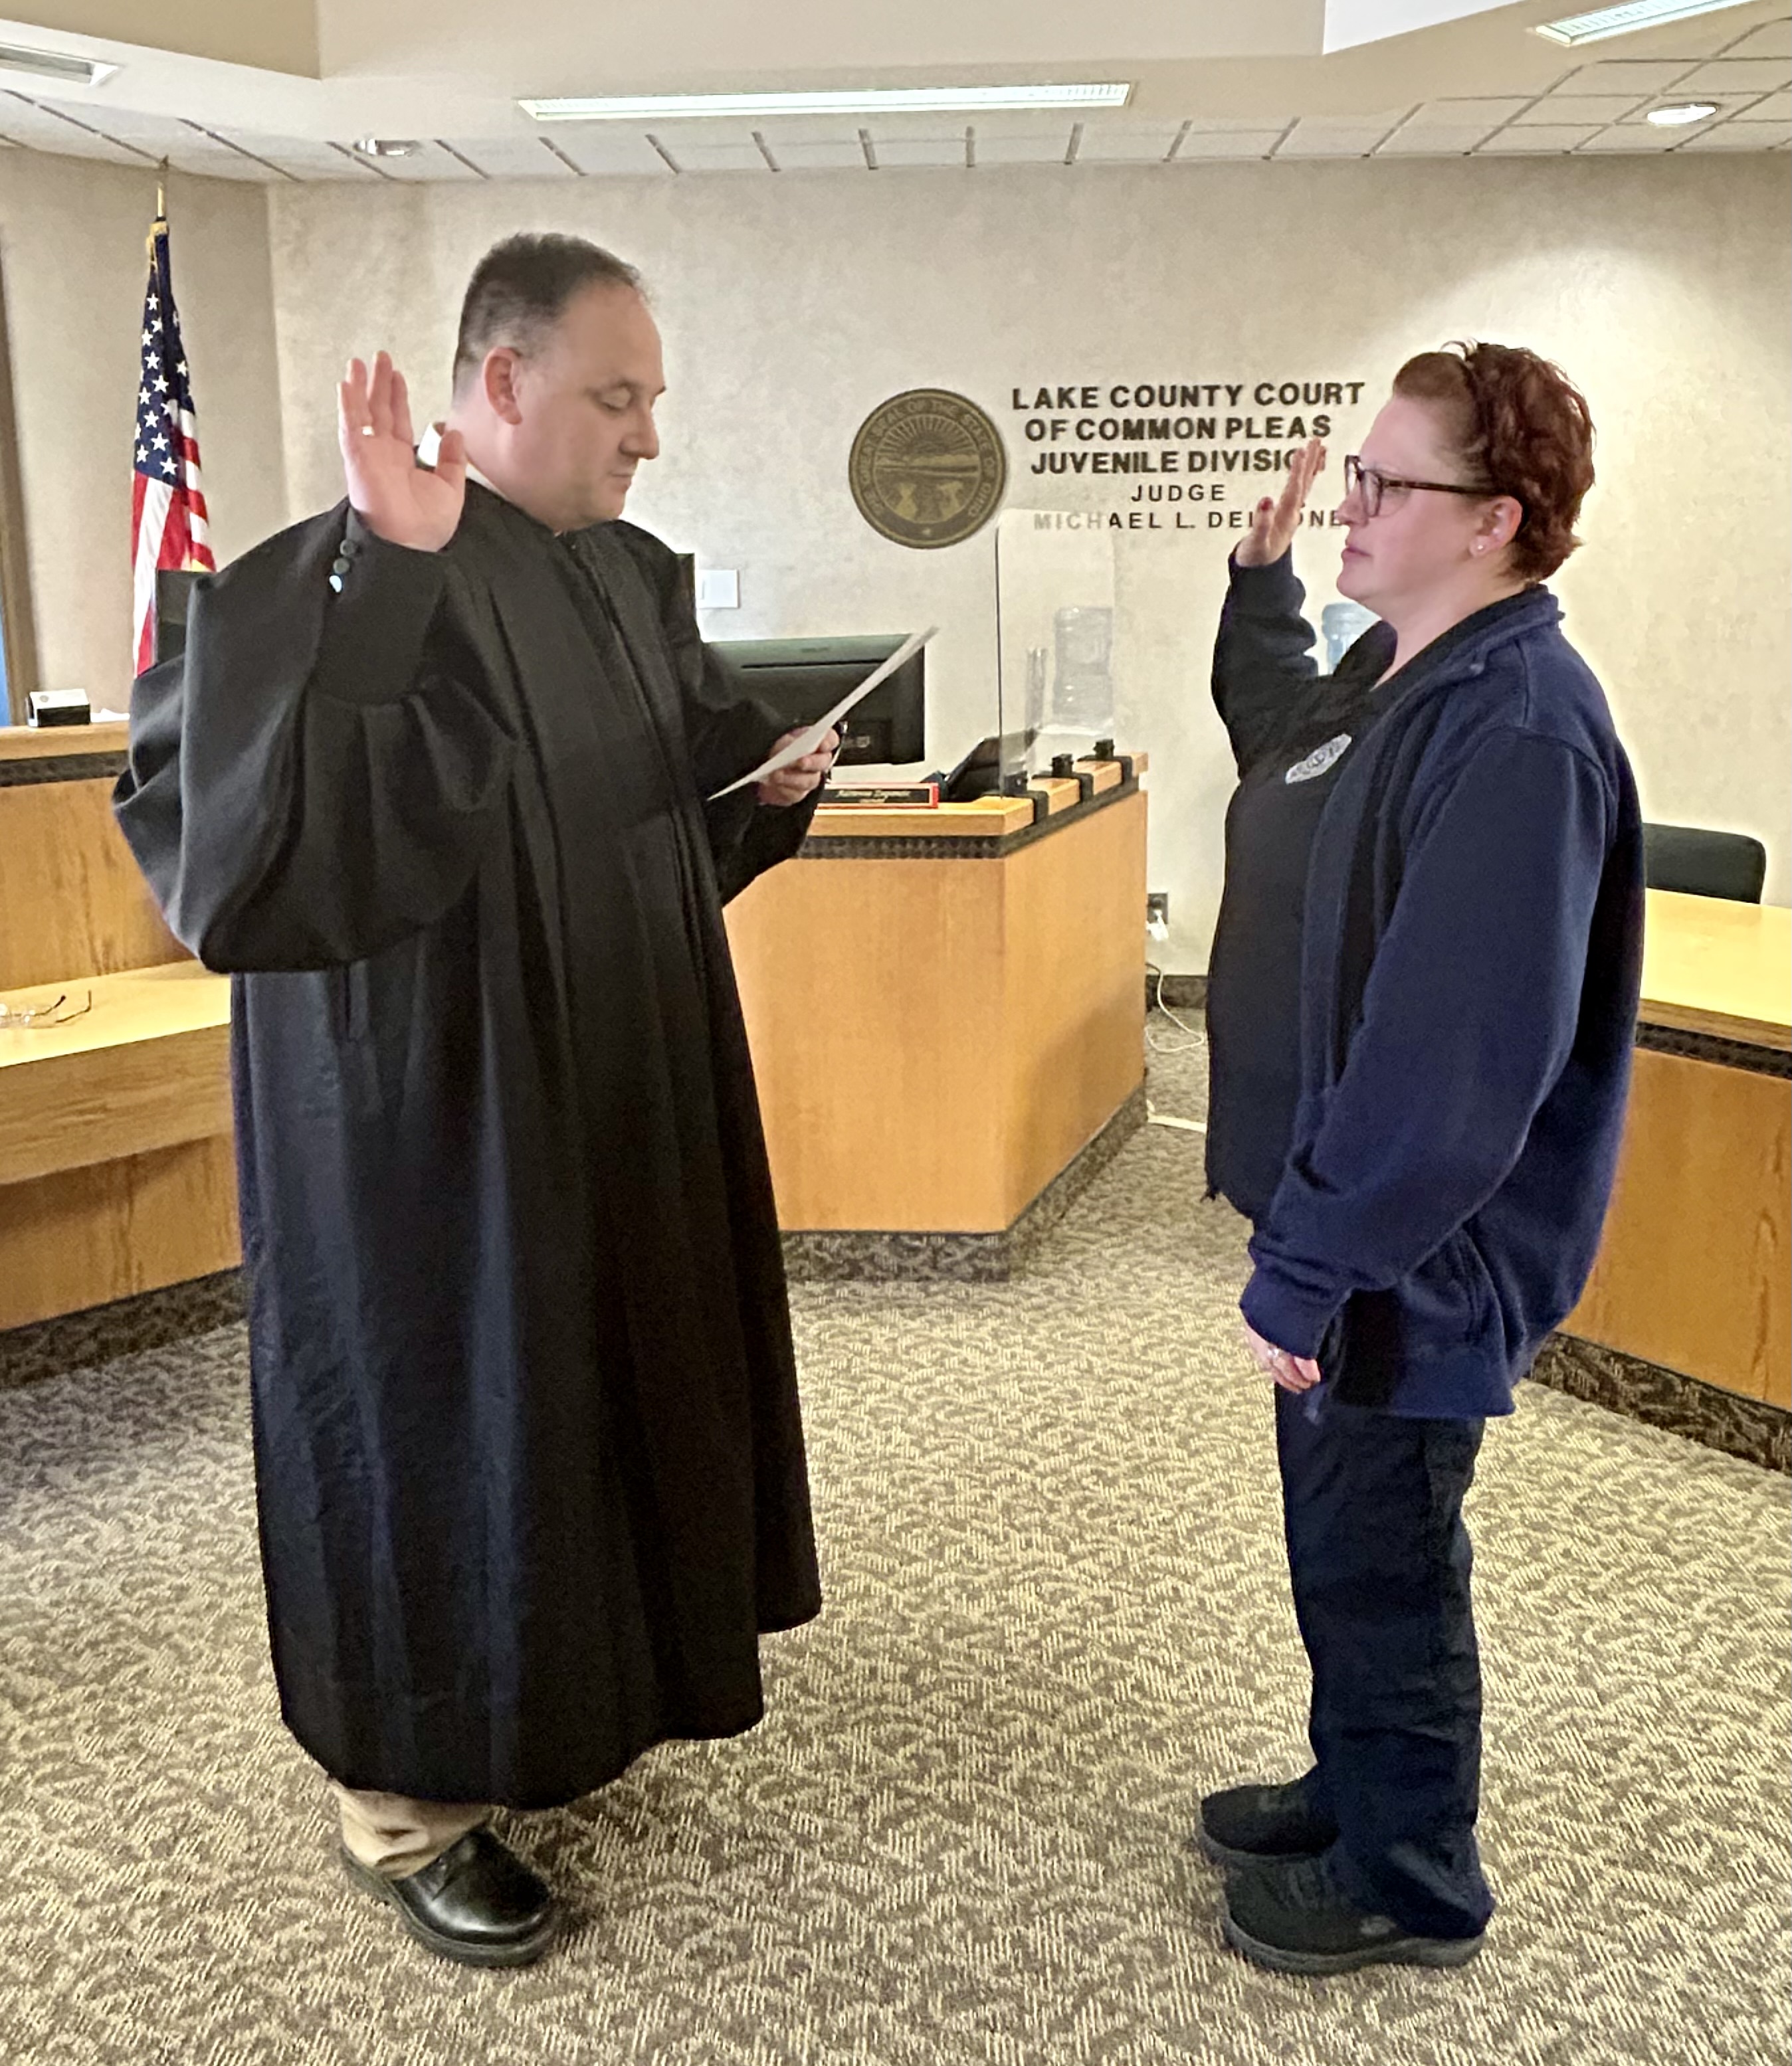 Judge DeLeone swearing in Sarah Boyce from Willowick Police Department